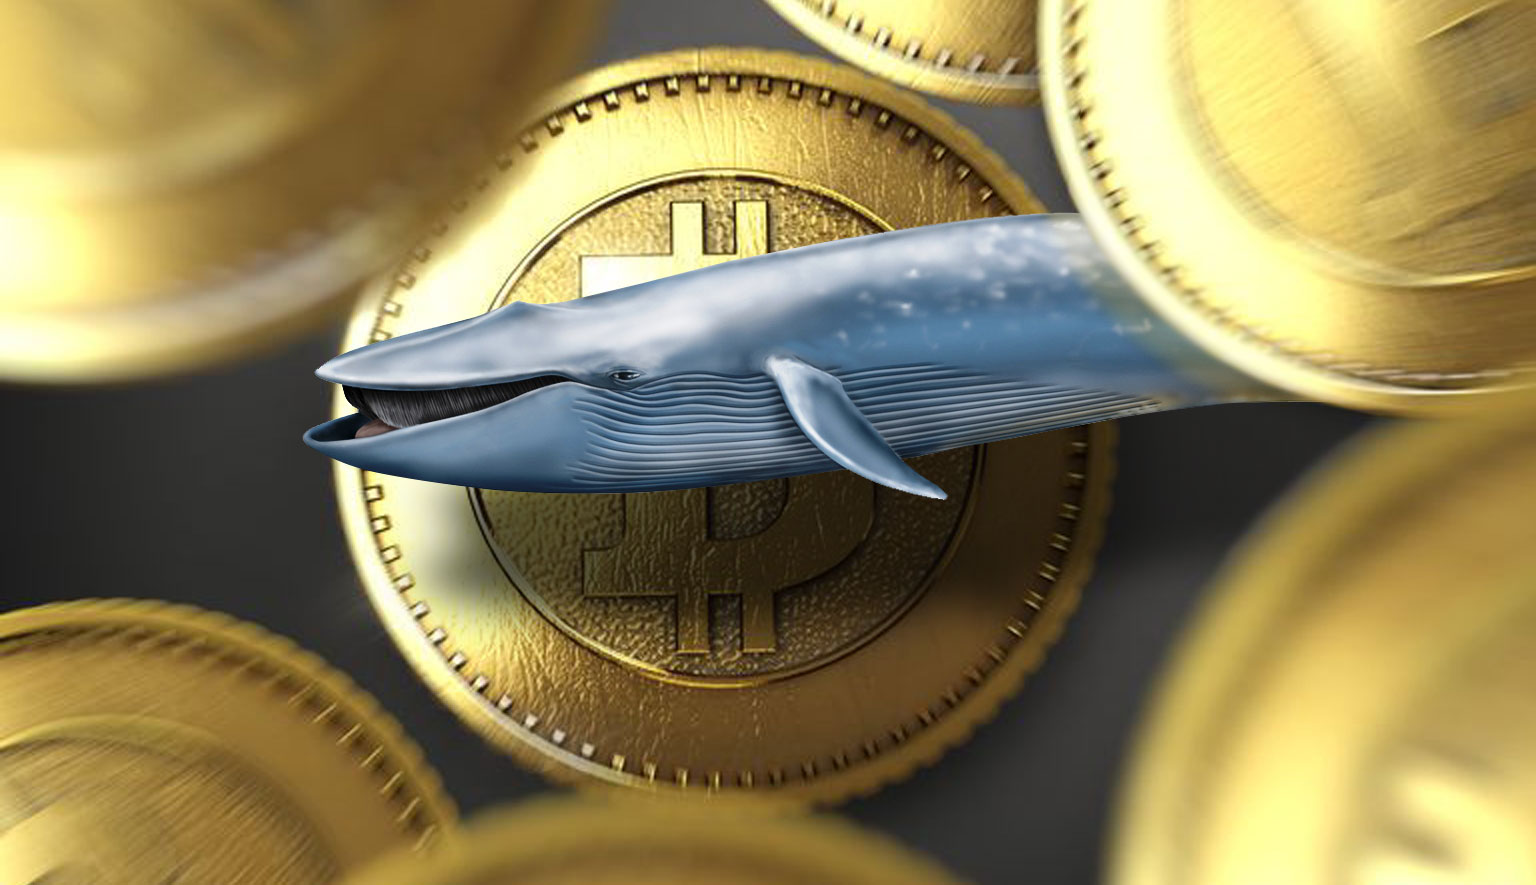 The Bitcoin whales added 50,000 BTC to their bitcoin reserves in ten days, taking advantage of the cryptocurrency's decline.